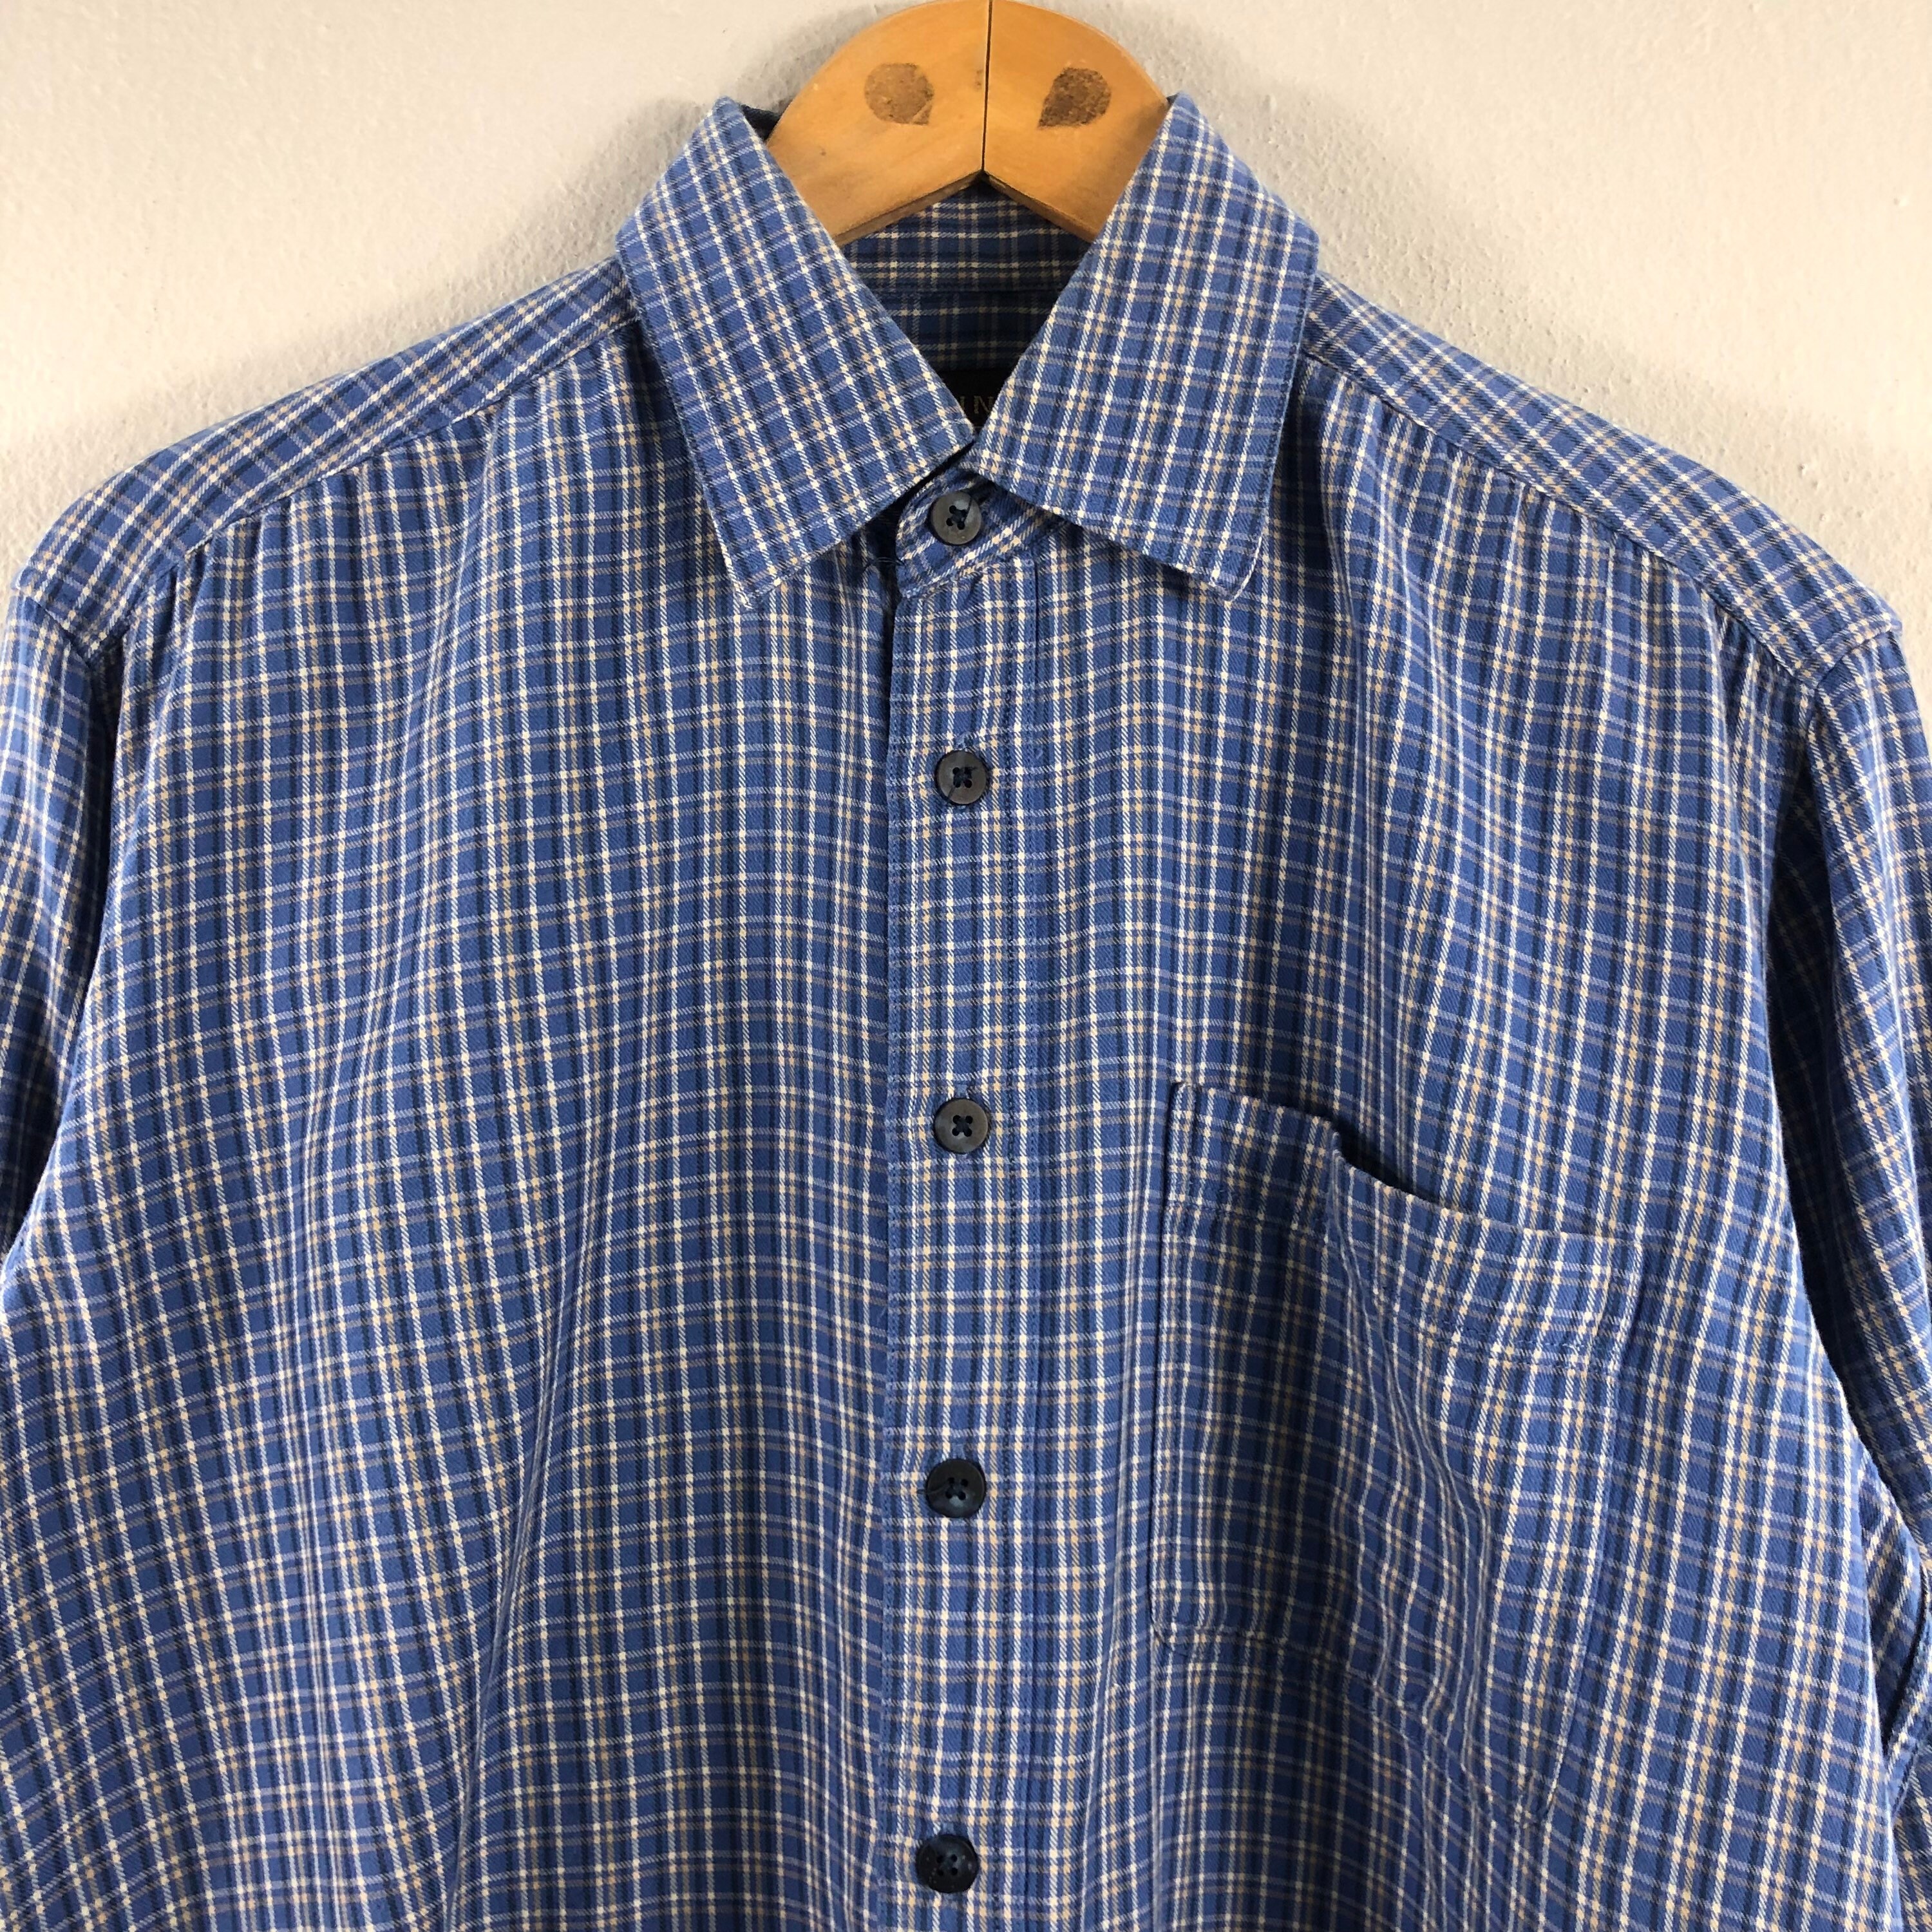 Wear Flannel Plaid Oxford Medium Fashion Shirt Blue Outfits Brand Volunt up Etsy Outfit Japanese Casual - Longsleeve Button Vintage Menswear